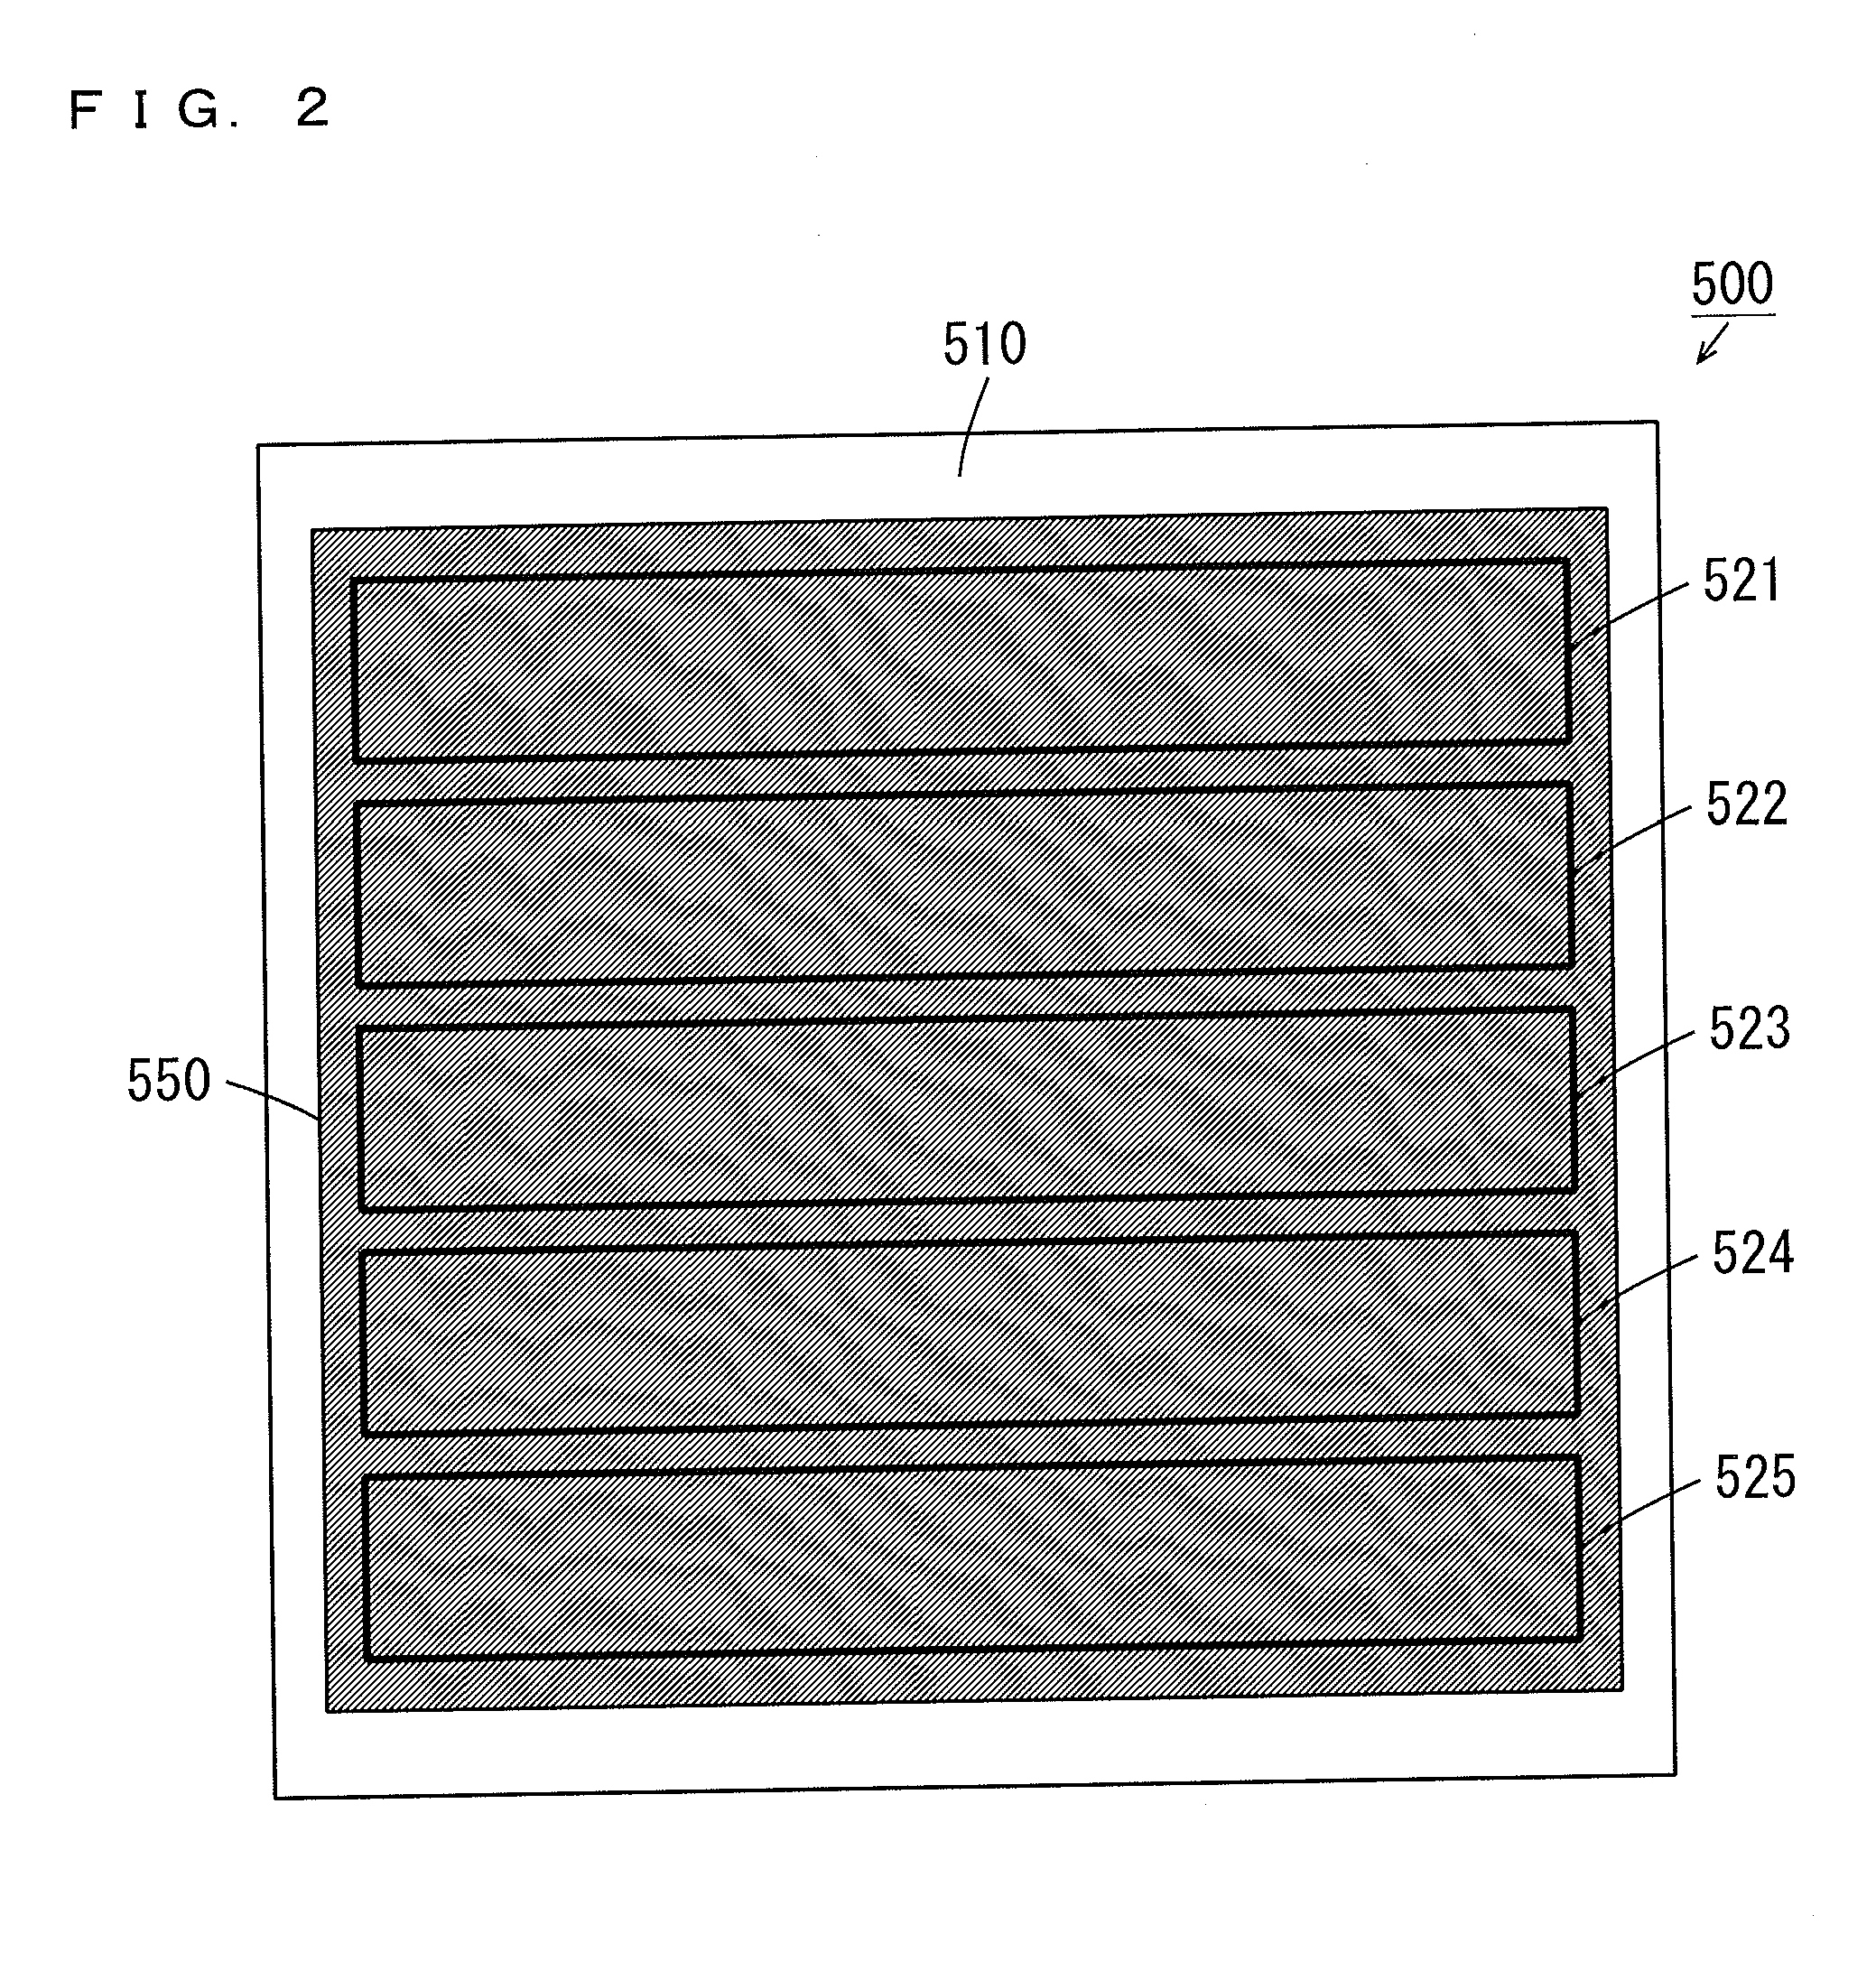 Suspension board assembly sheet with circuits and method for manufacturing the same